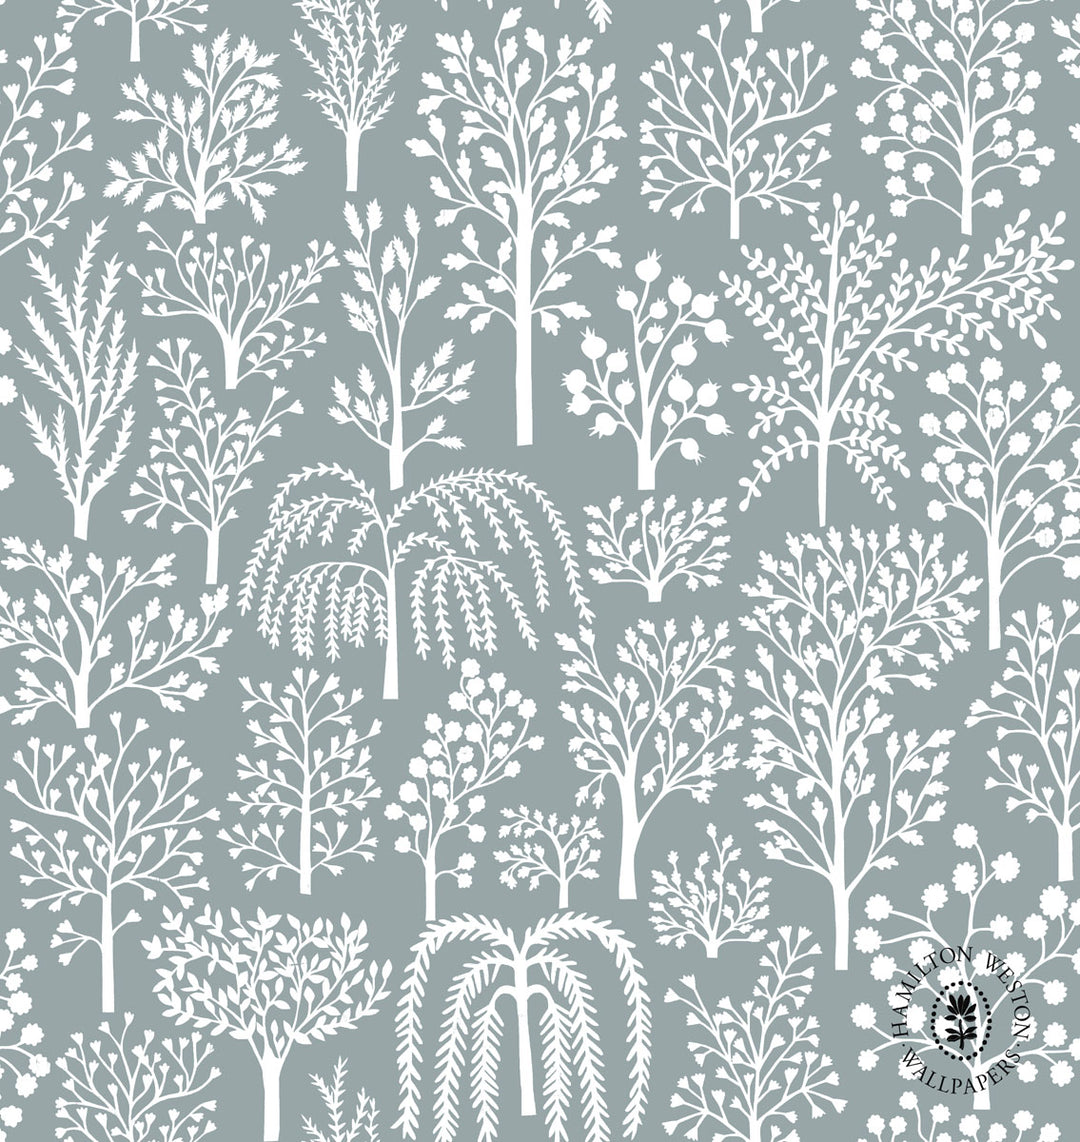 Hamilton-weston-wallpaper-Alice-Pattullo-Arboretum-hand-paper-cutting-Pigeon-APARB03-traditional-stlye-pattern-country-trees